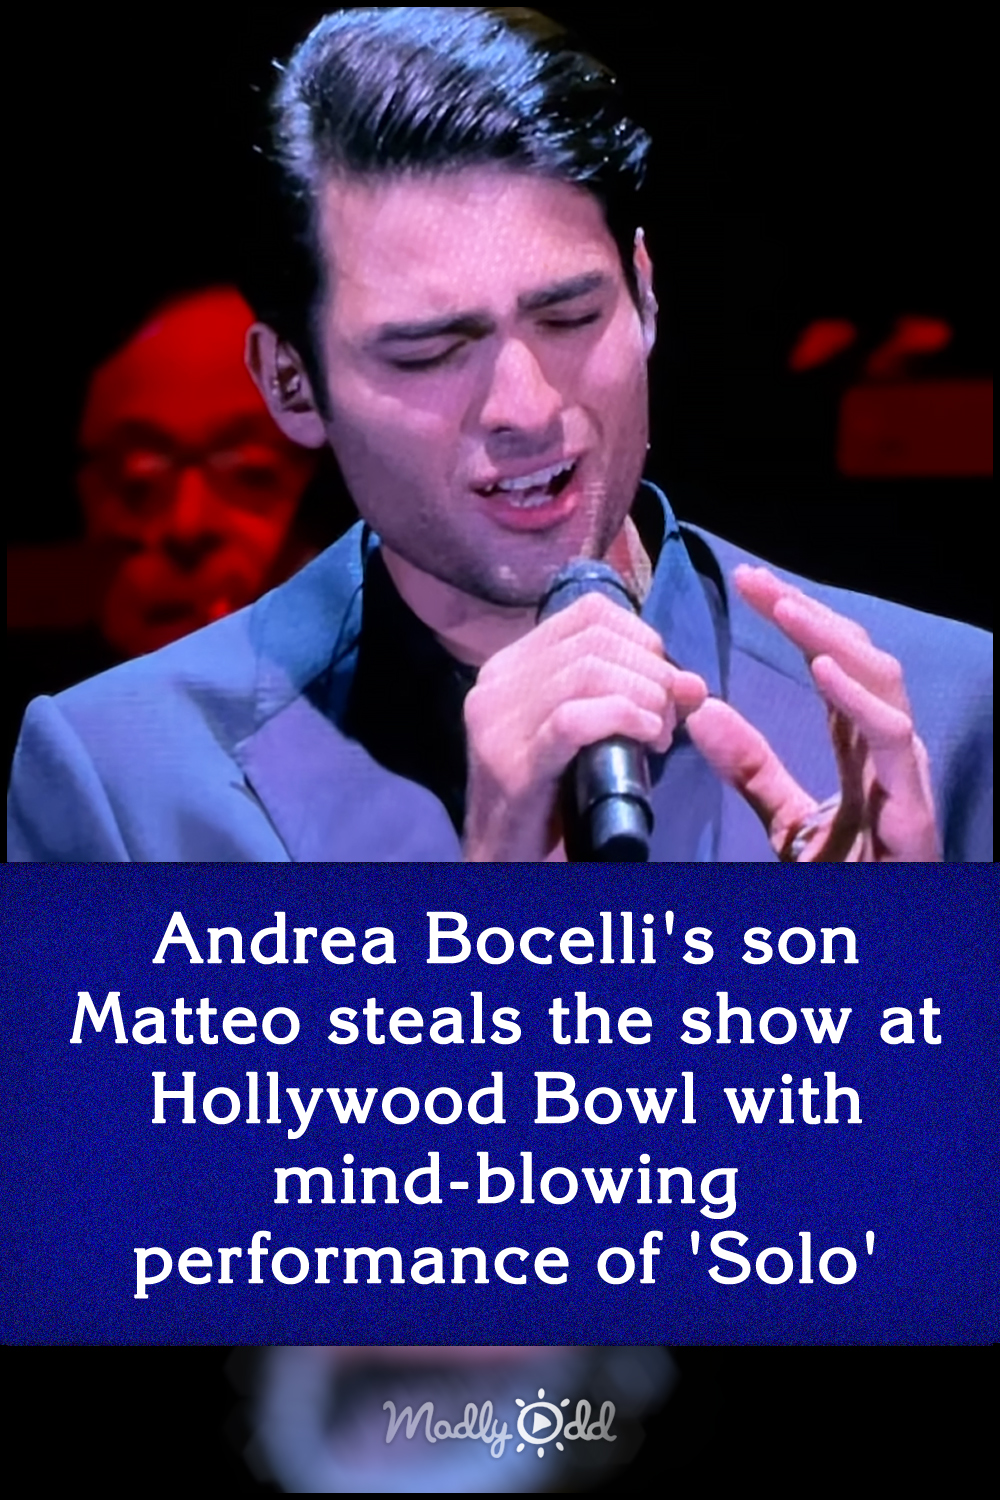 Andrea Bocelli\'s son Matteo steals the show at Hollywood Bowl with mind-blowing performance of \'Solo\'